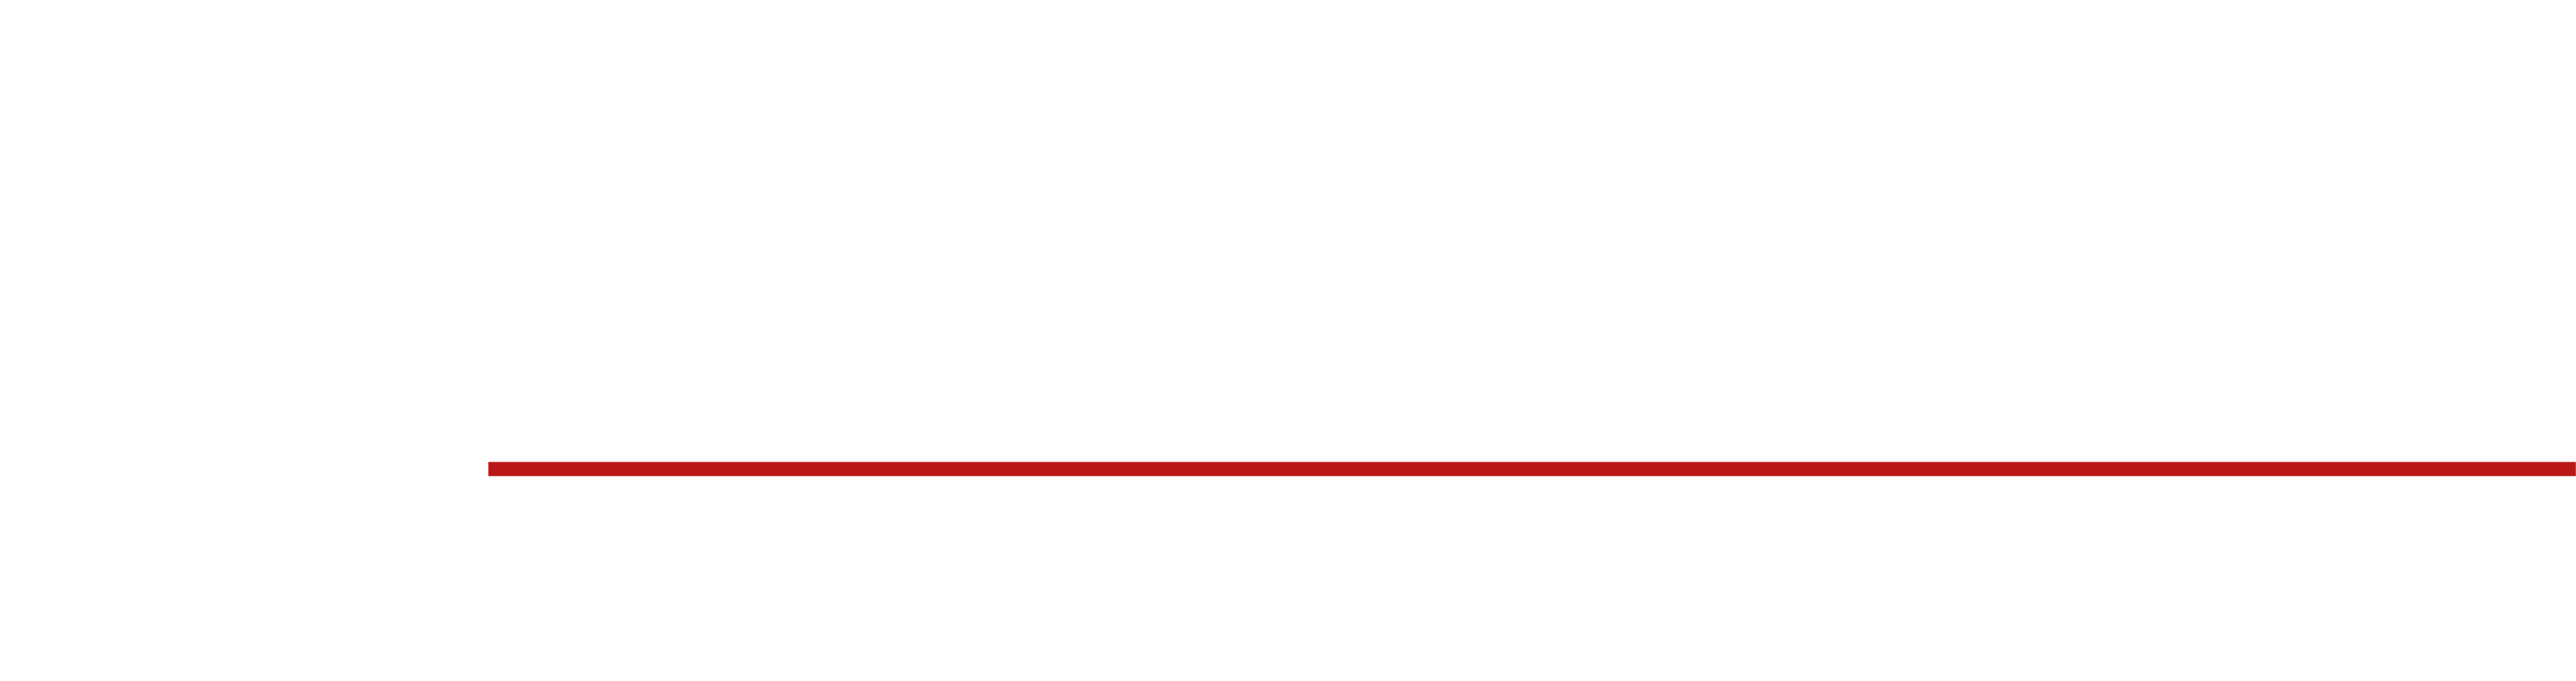 Efficient Frontiers International Limited